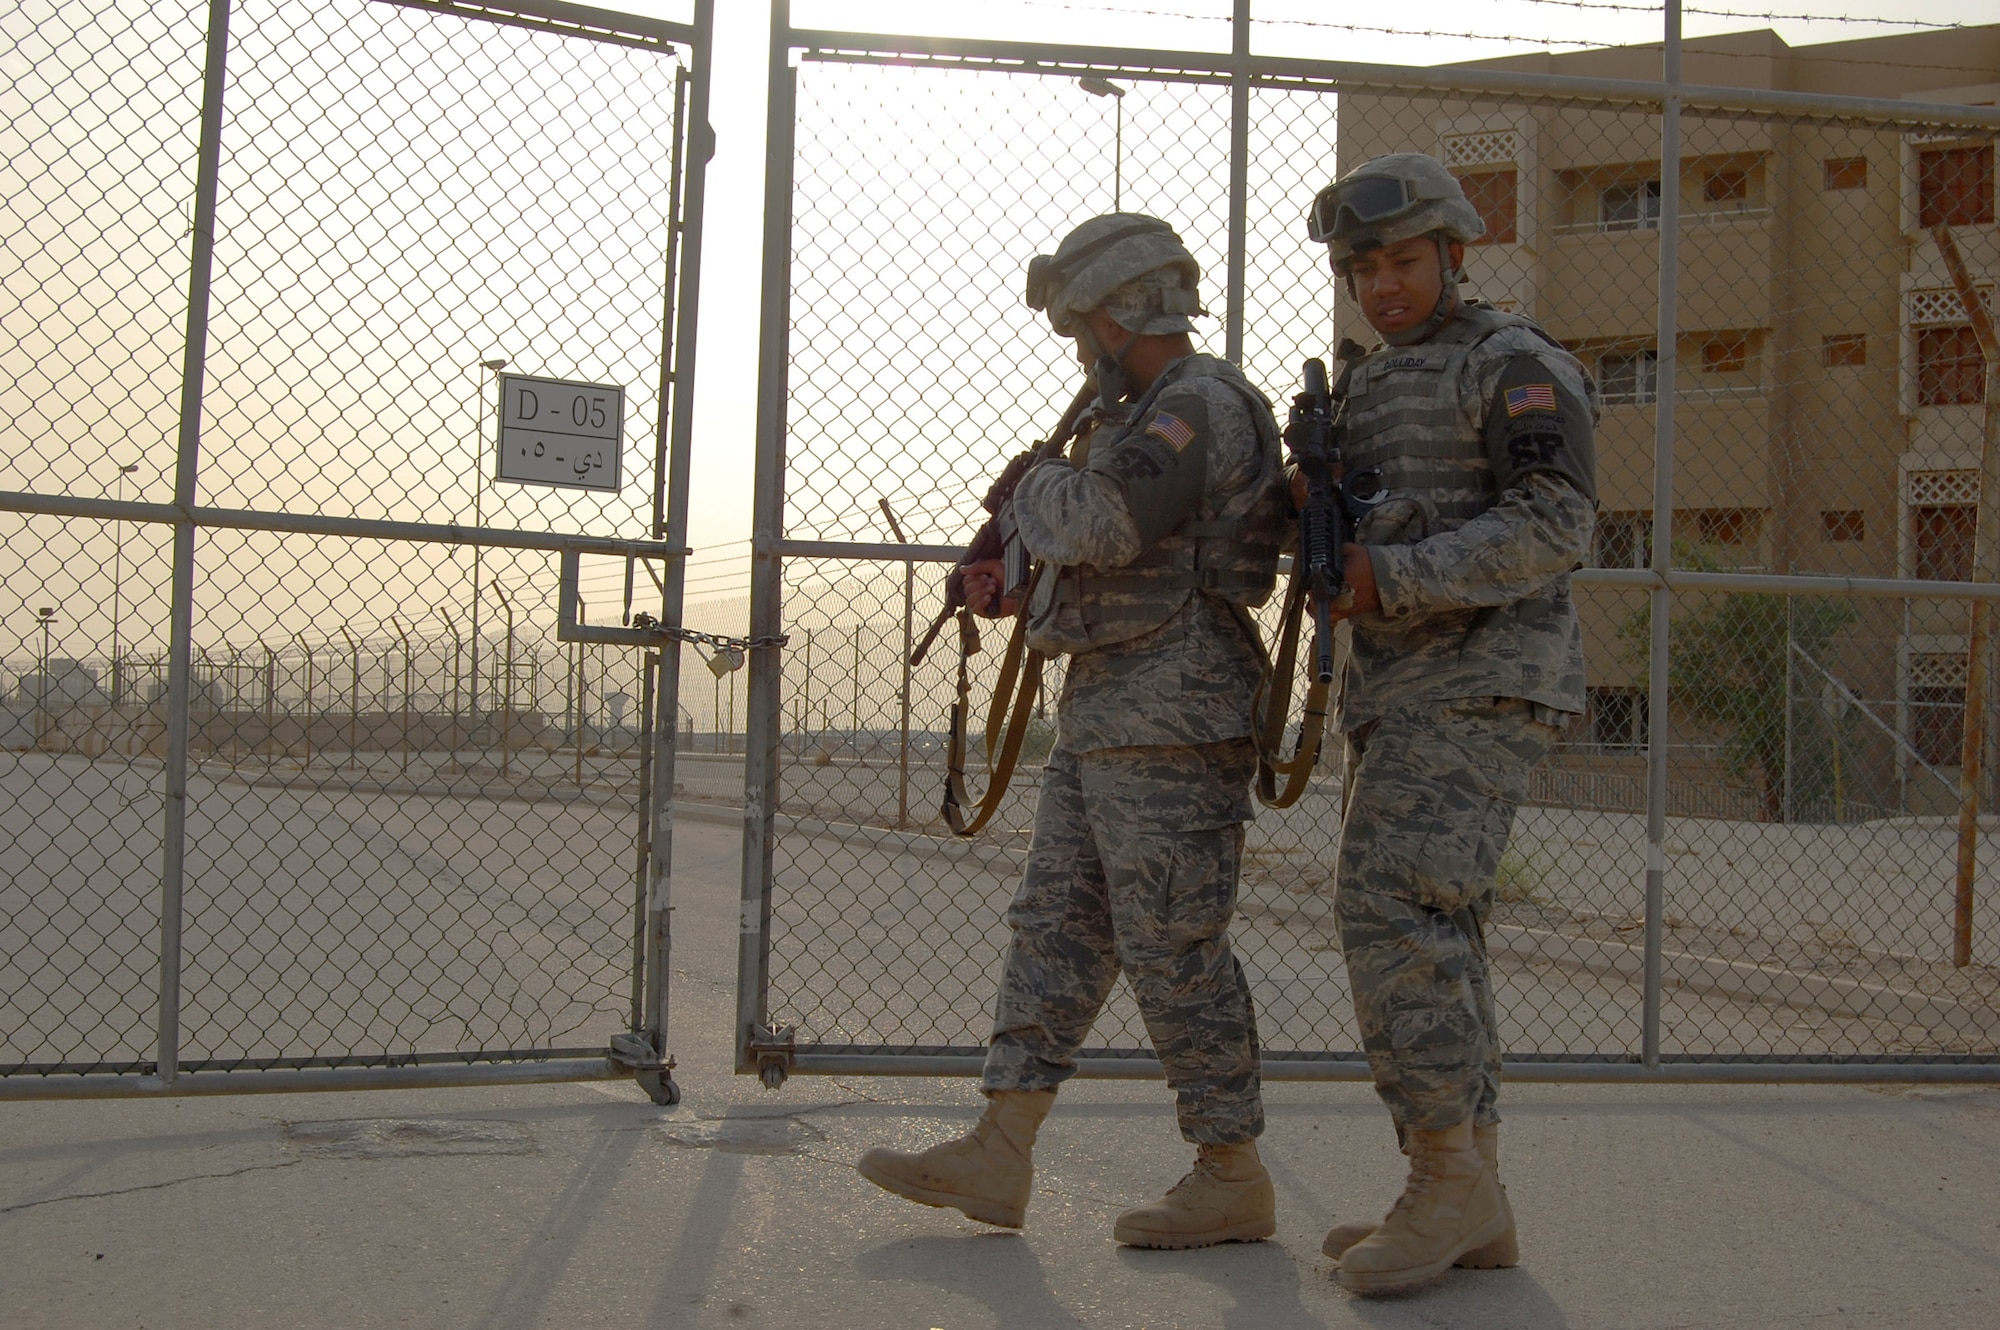 Senior Airman Charles Anderson-Goodman and Airman 1st Class Reginald Golliday, 64th Expeditionary Security Forces Squadron, check a gate at a deployed location in Southwest Asia, July 13. The Airmen are the first two to deploy from a team of Security Forces members attacked, March 2, on a bus at the airport in Frankfurt, Germany. Two teammates were killed and two were injured in the attack. Both Airmen are deployed from the 48th Security Forces Squadron, Royal Air Force Lakenheath, England. (U.S. Air Force photo/Airman 1st Class Timothy A. Genders)